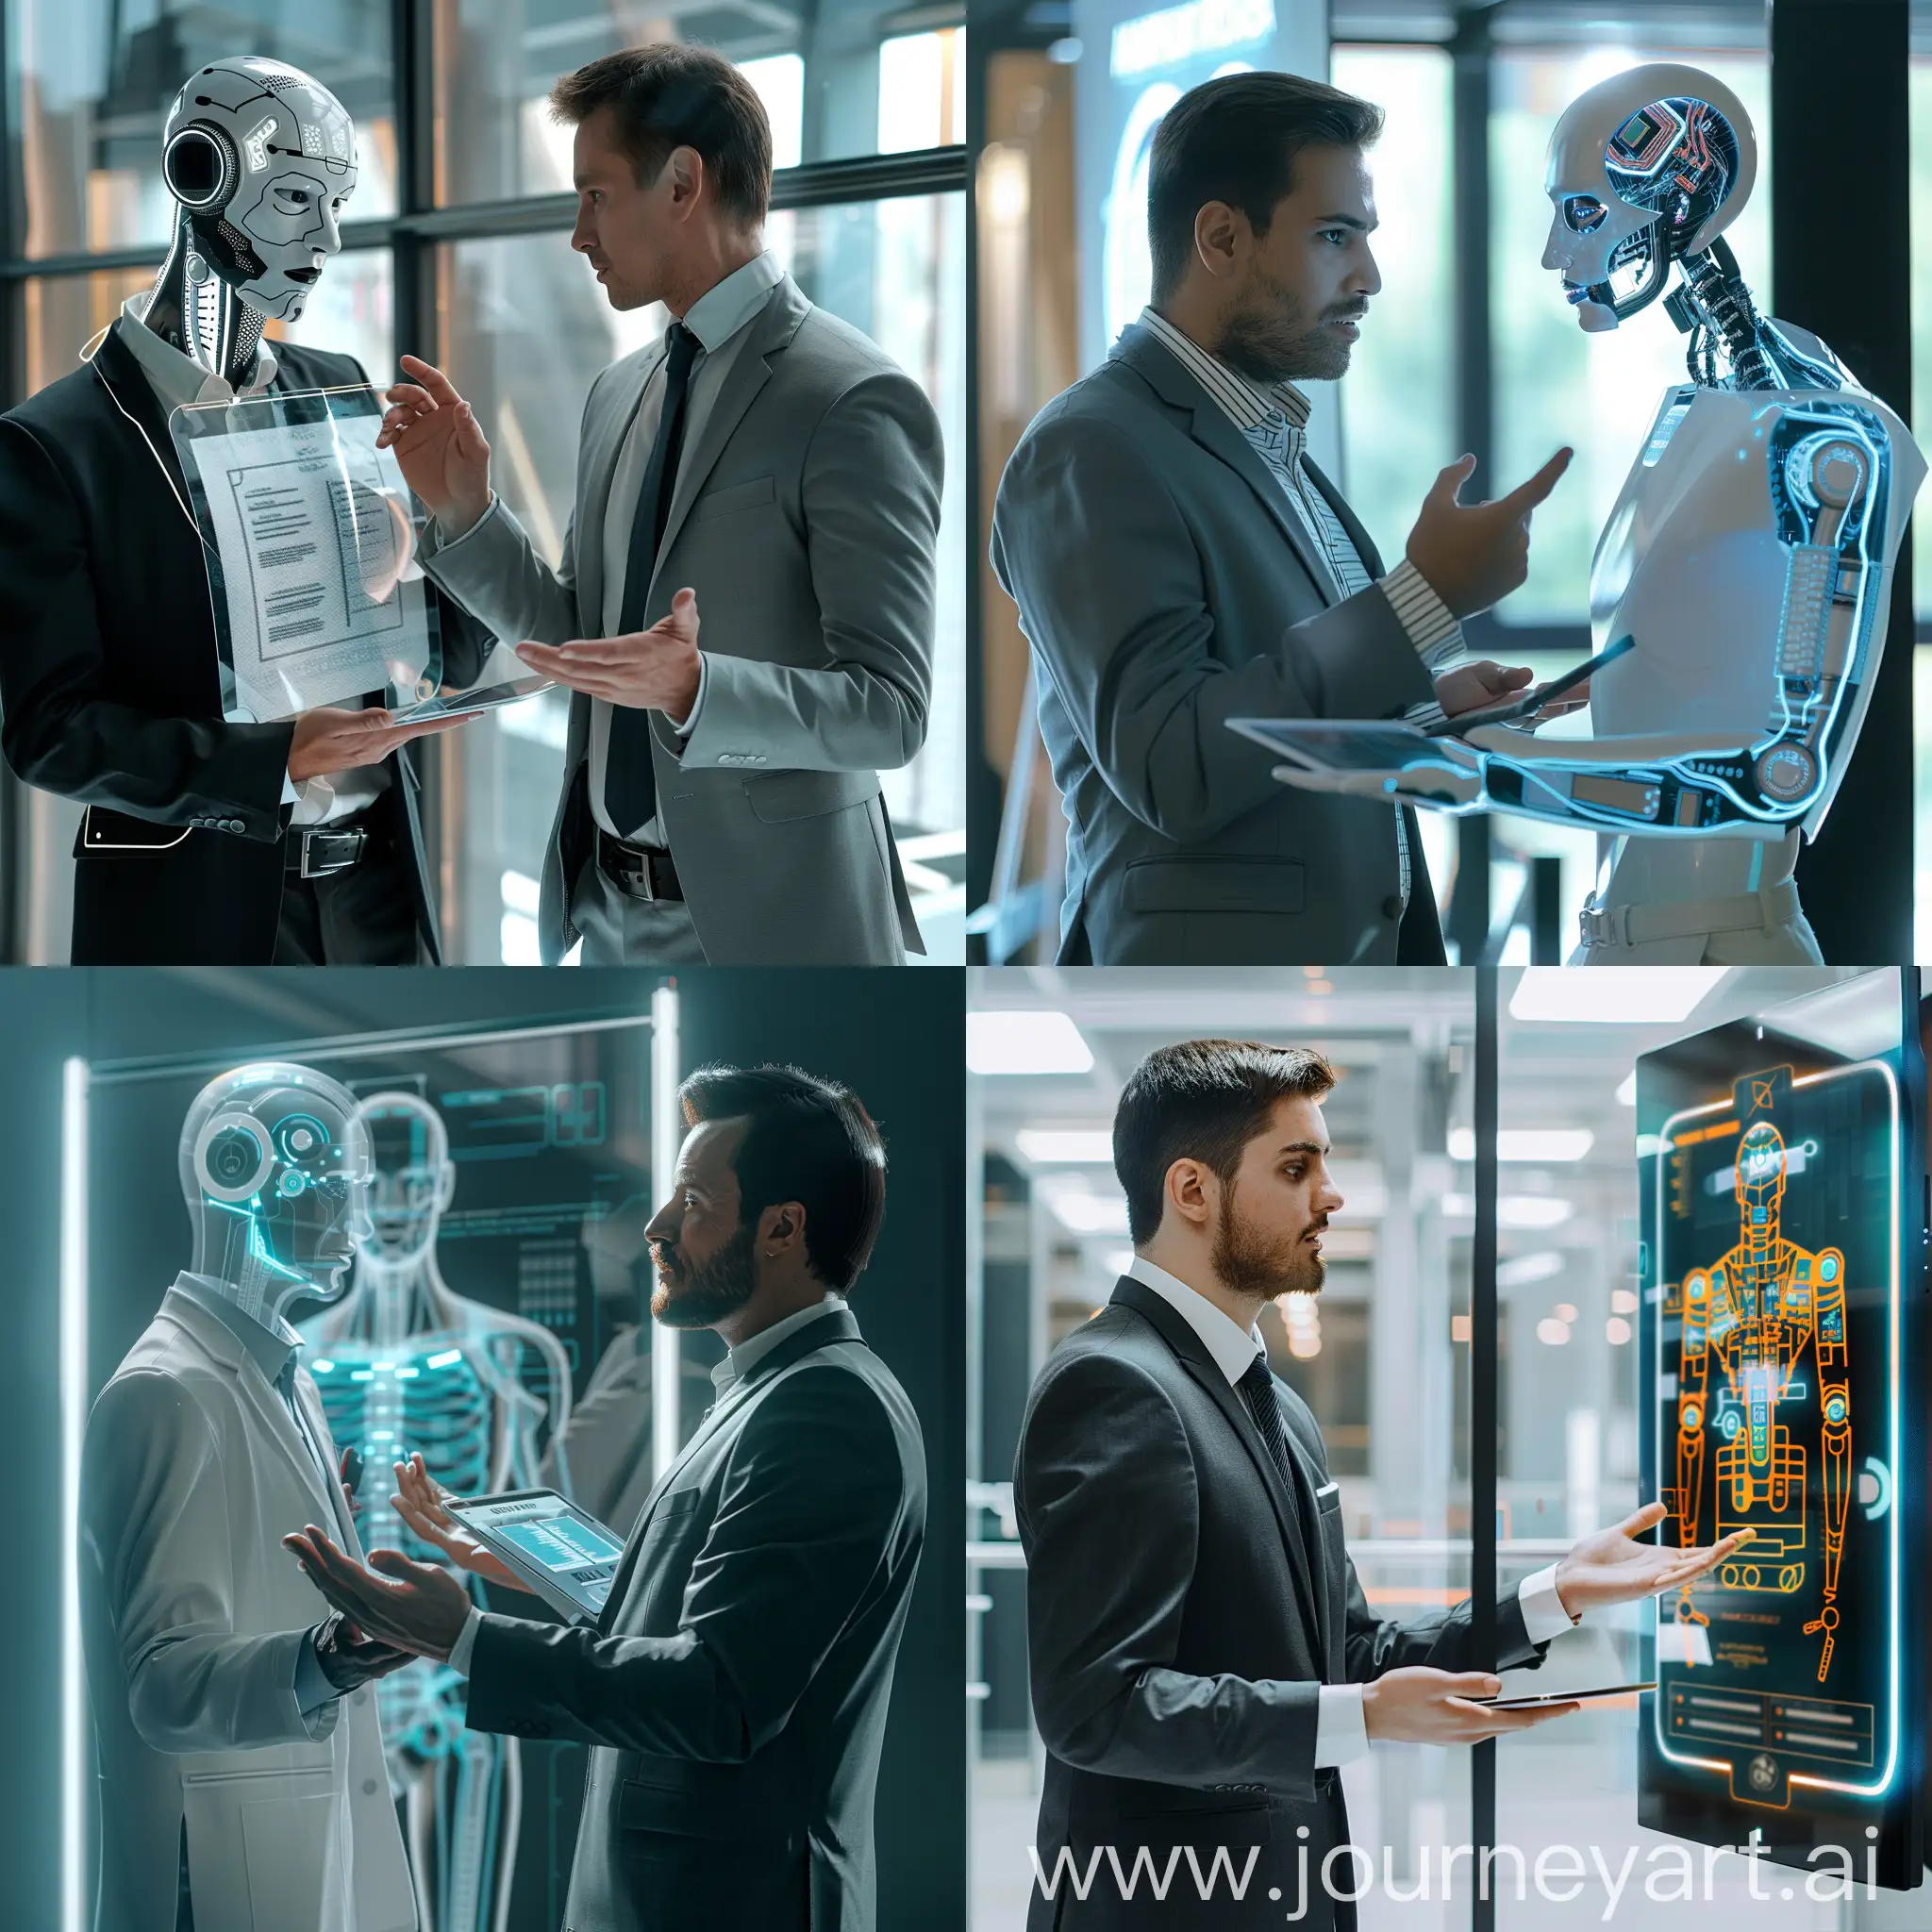 A modern AI personal assistant is assisting a manager with his agenda and meeting speech. The AI appears as a sleek, futuristic interface, possibly displayed on a tablet or a holographic screen. The manager, dressed in professional attire, is engaged in conversation with the AI assistant.